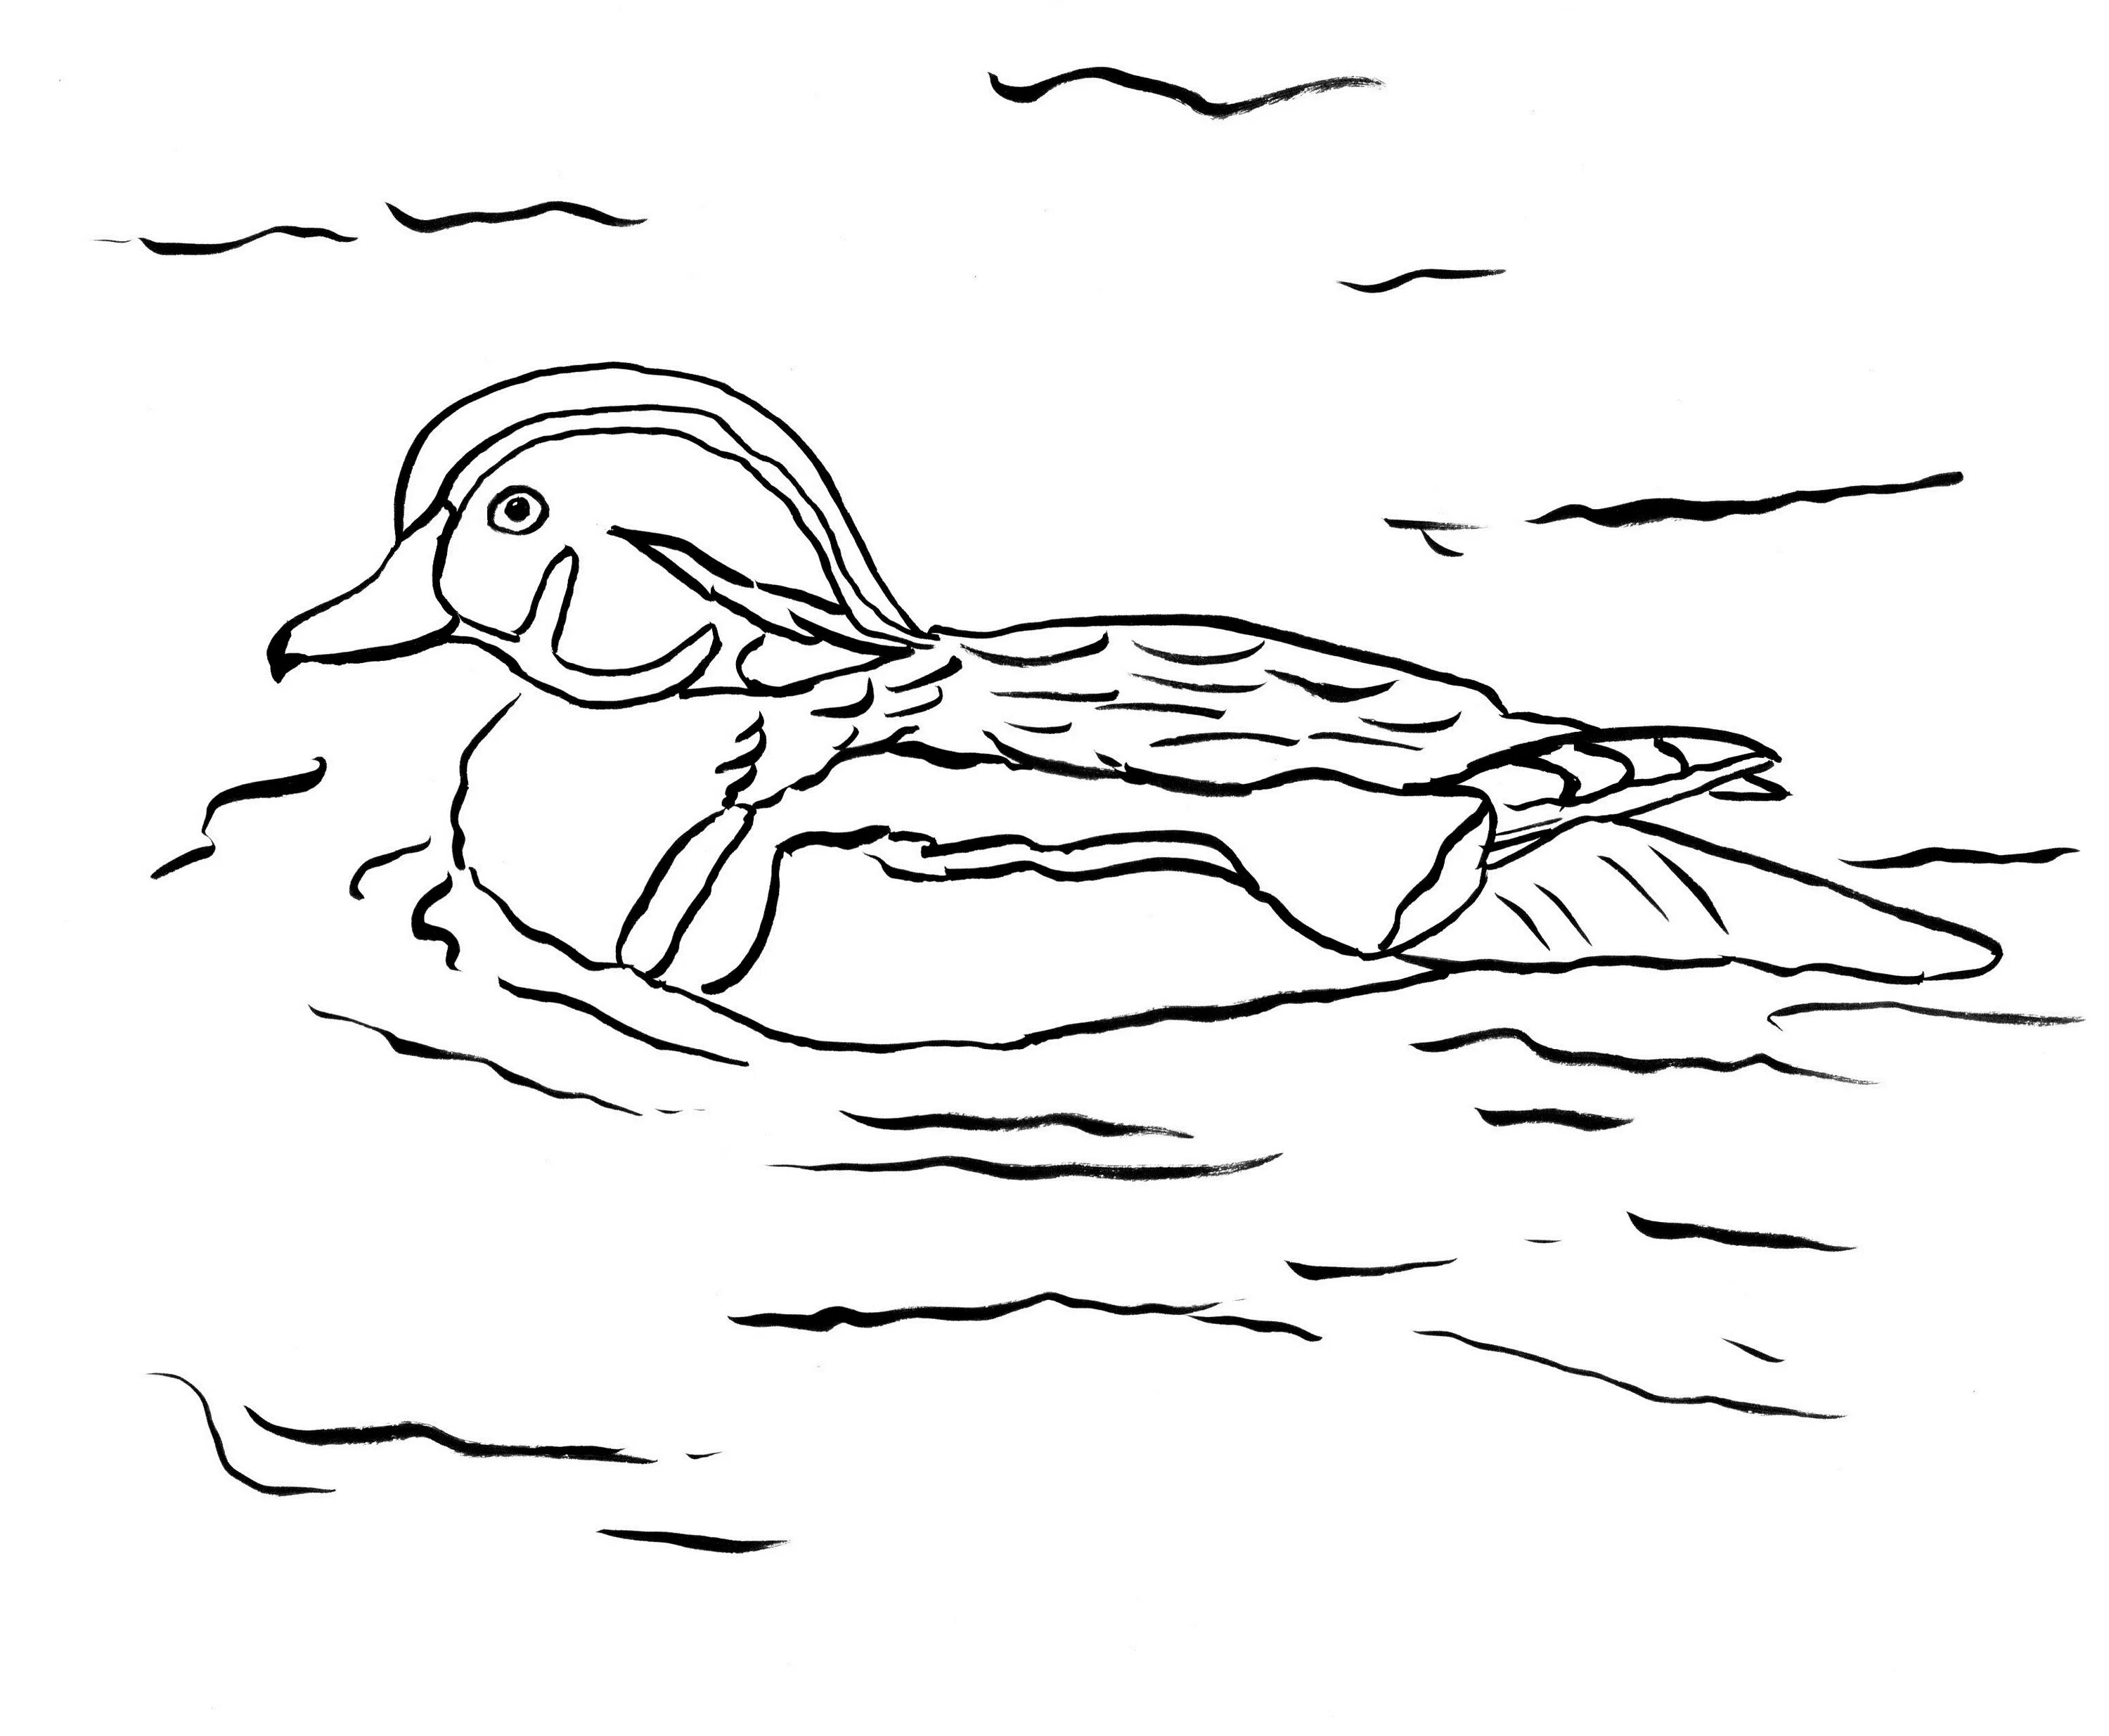 Impressive mandarin duck coloring page for kids